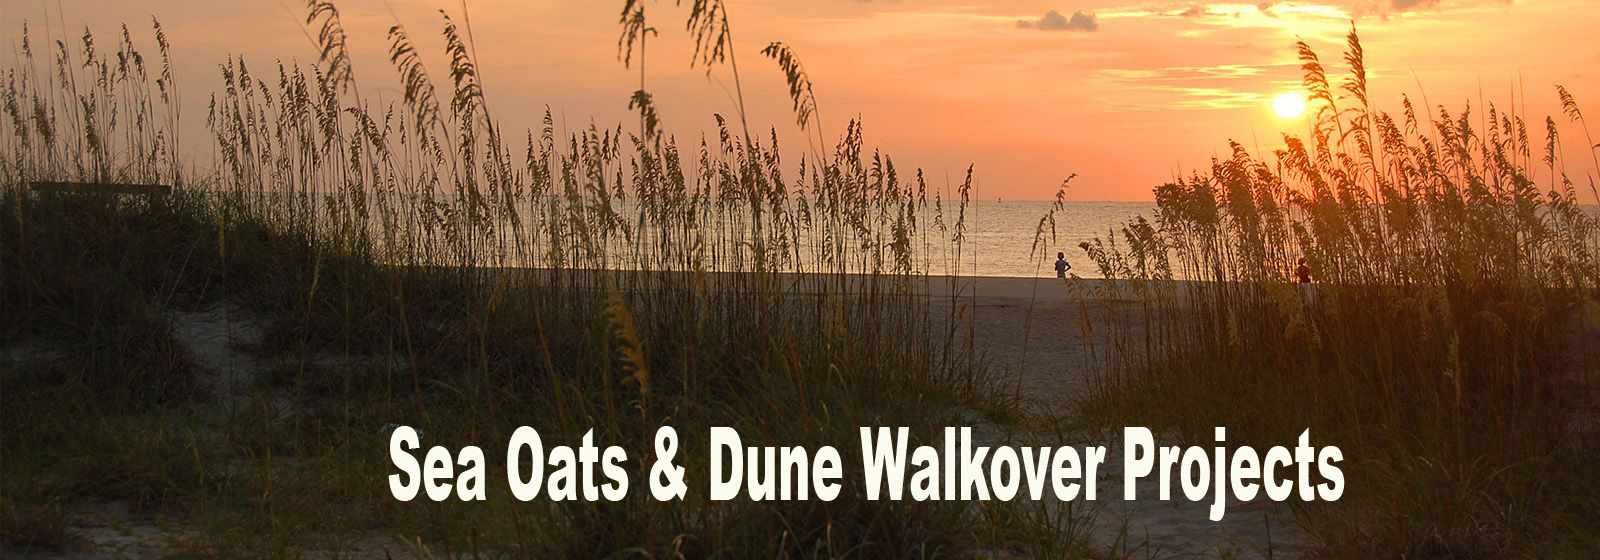 Mexico Beach Partners with Duke Energy on Sea Oats & Dune Walkover Projects